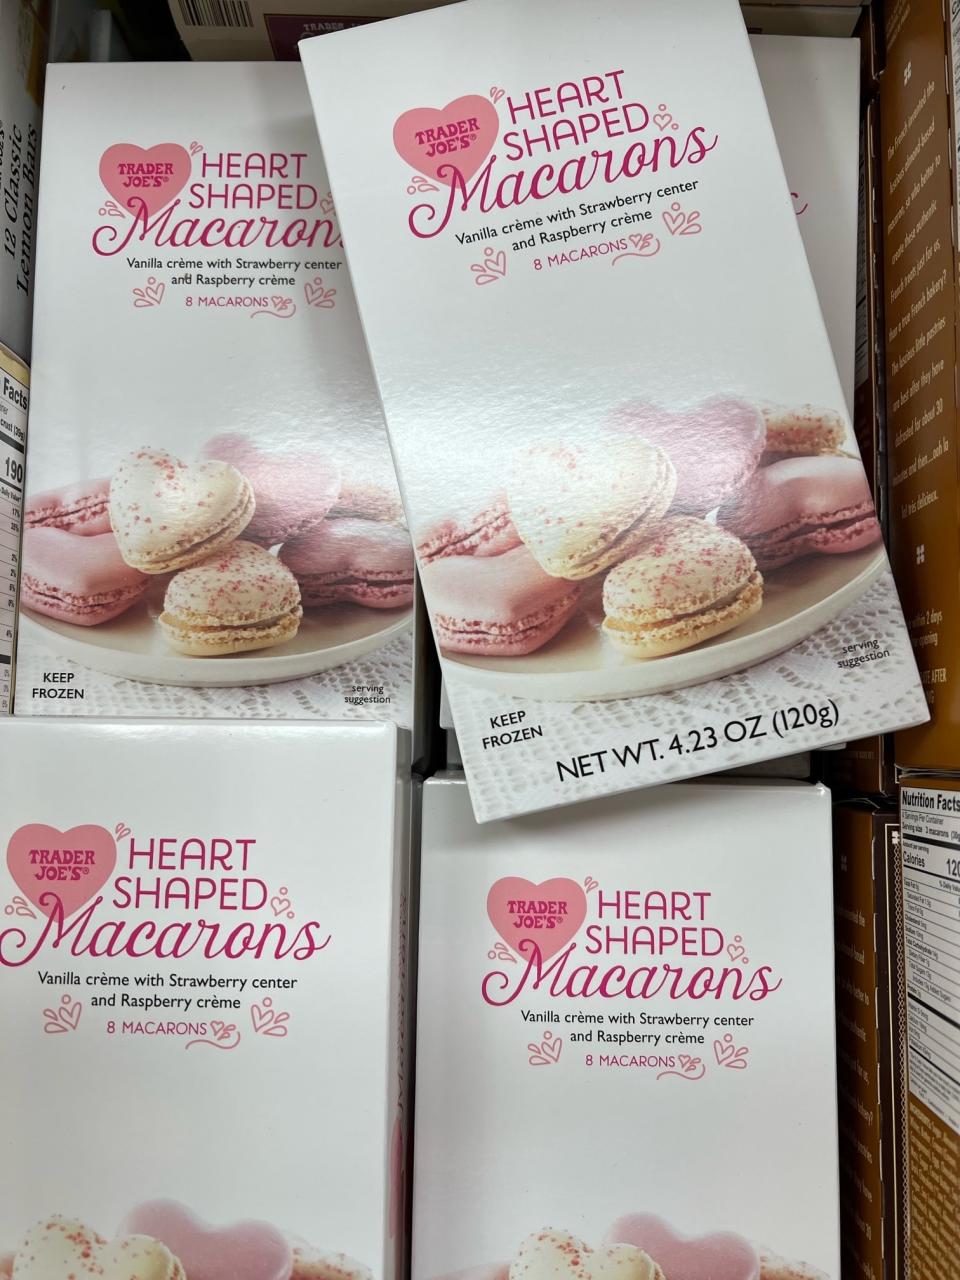 Boxes of frozen Heart Shaped Macarons